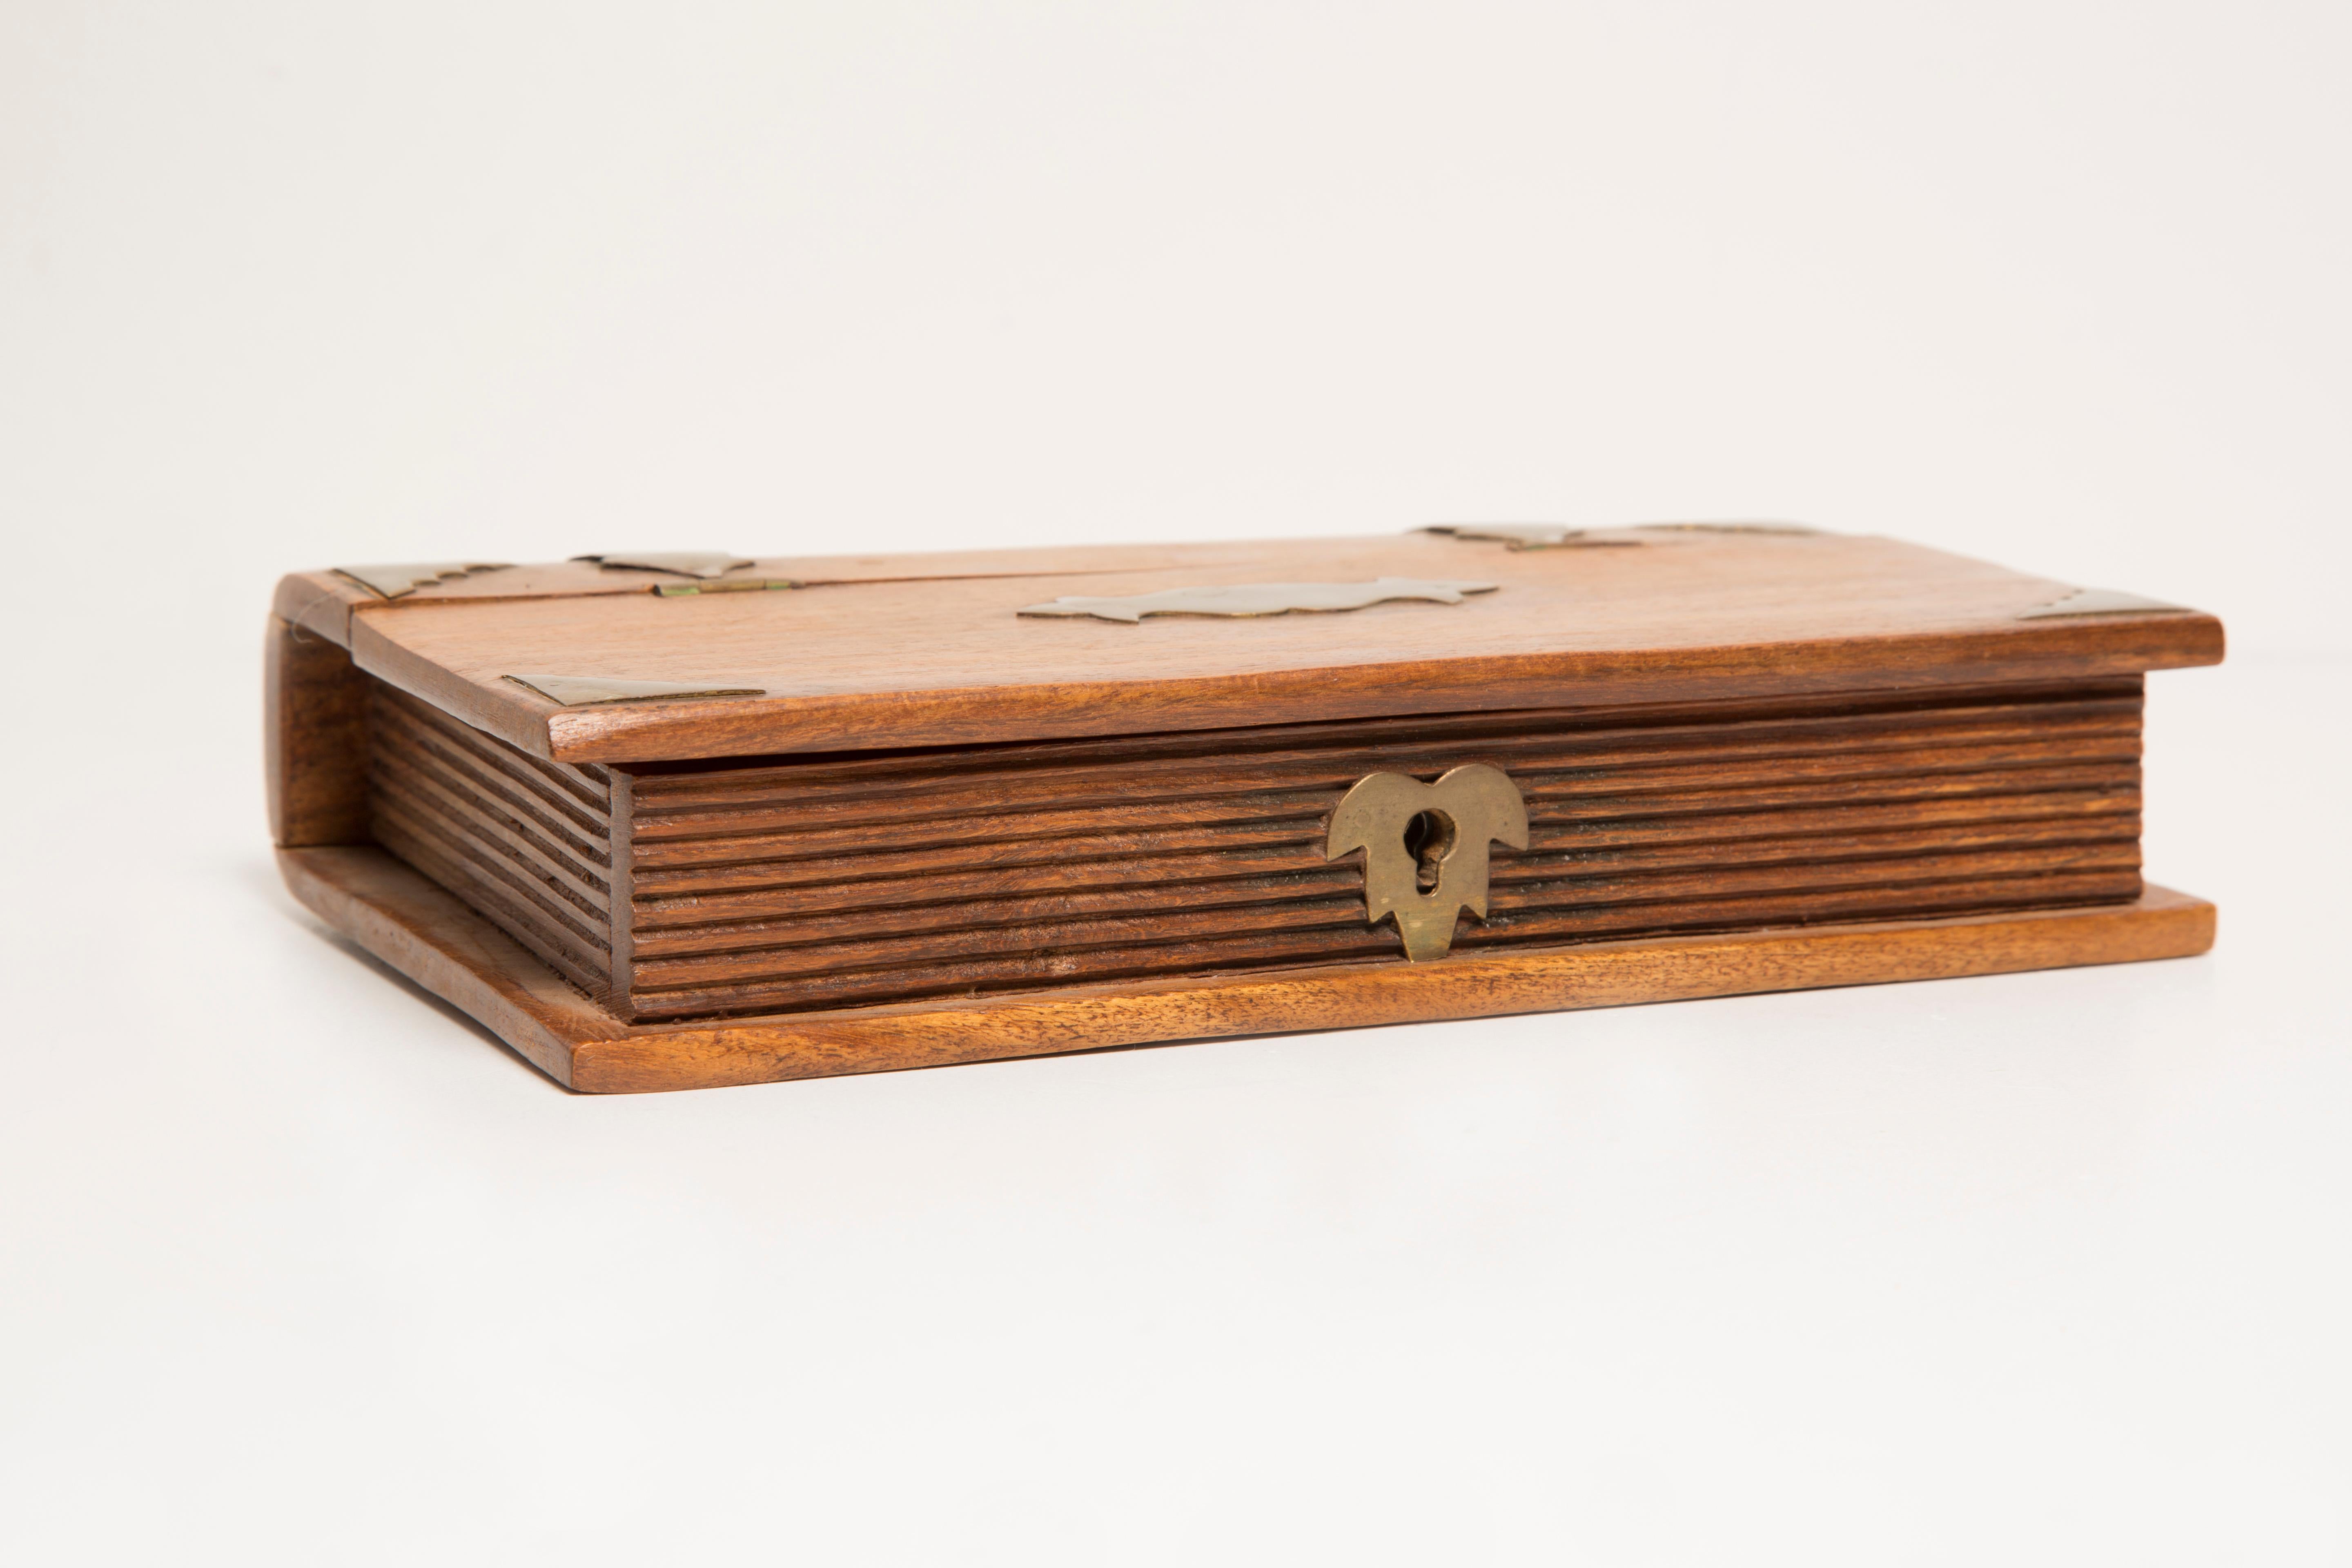 Italian Midcentury Wood Casket, Cigarette Case, or Jewelry Box, Italy, 1960s For Sale